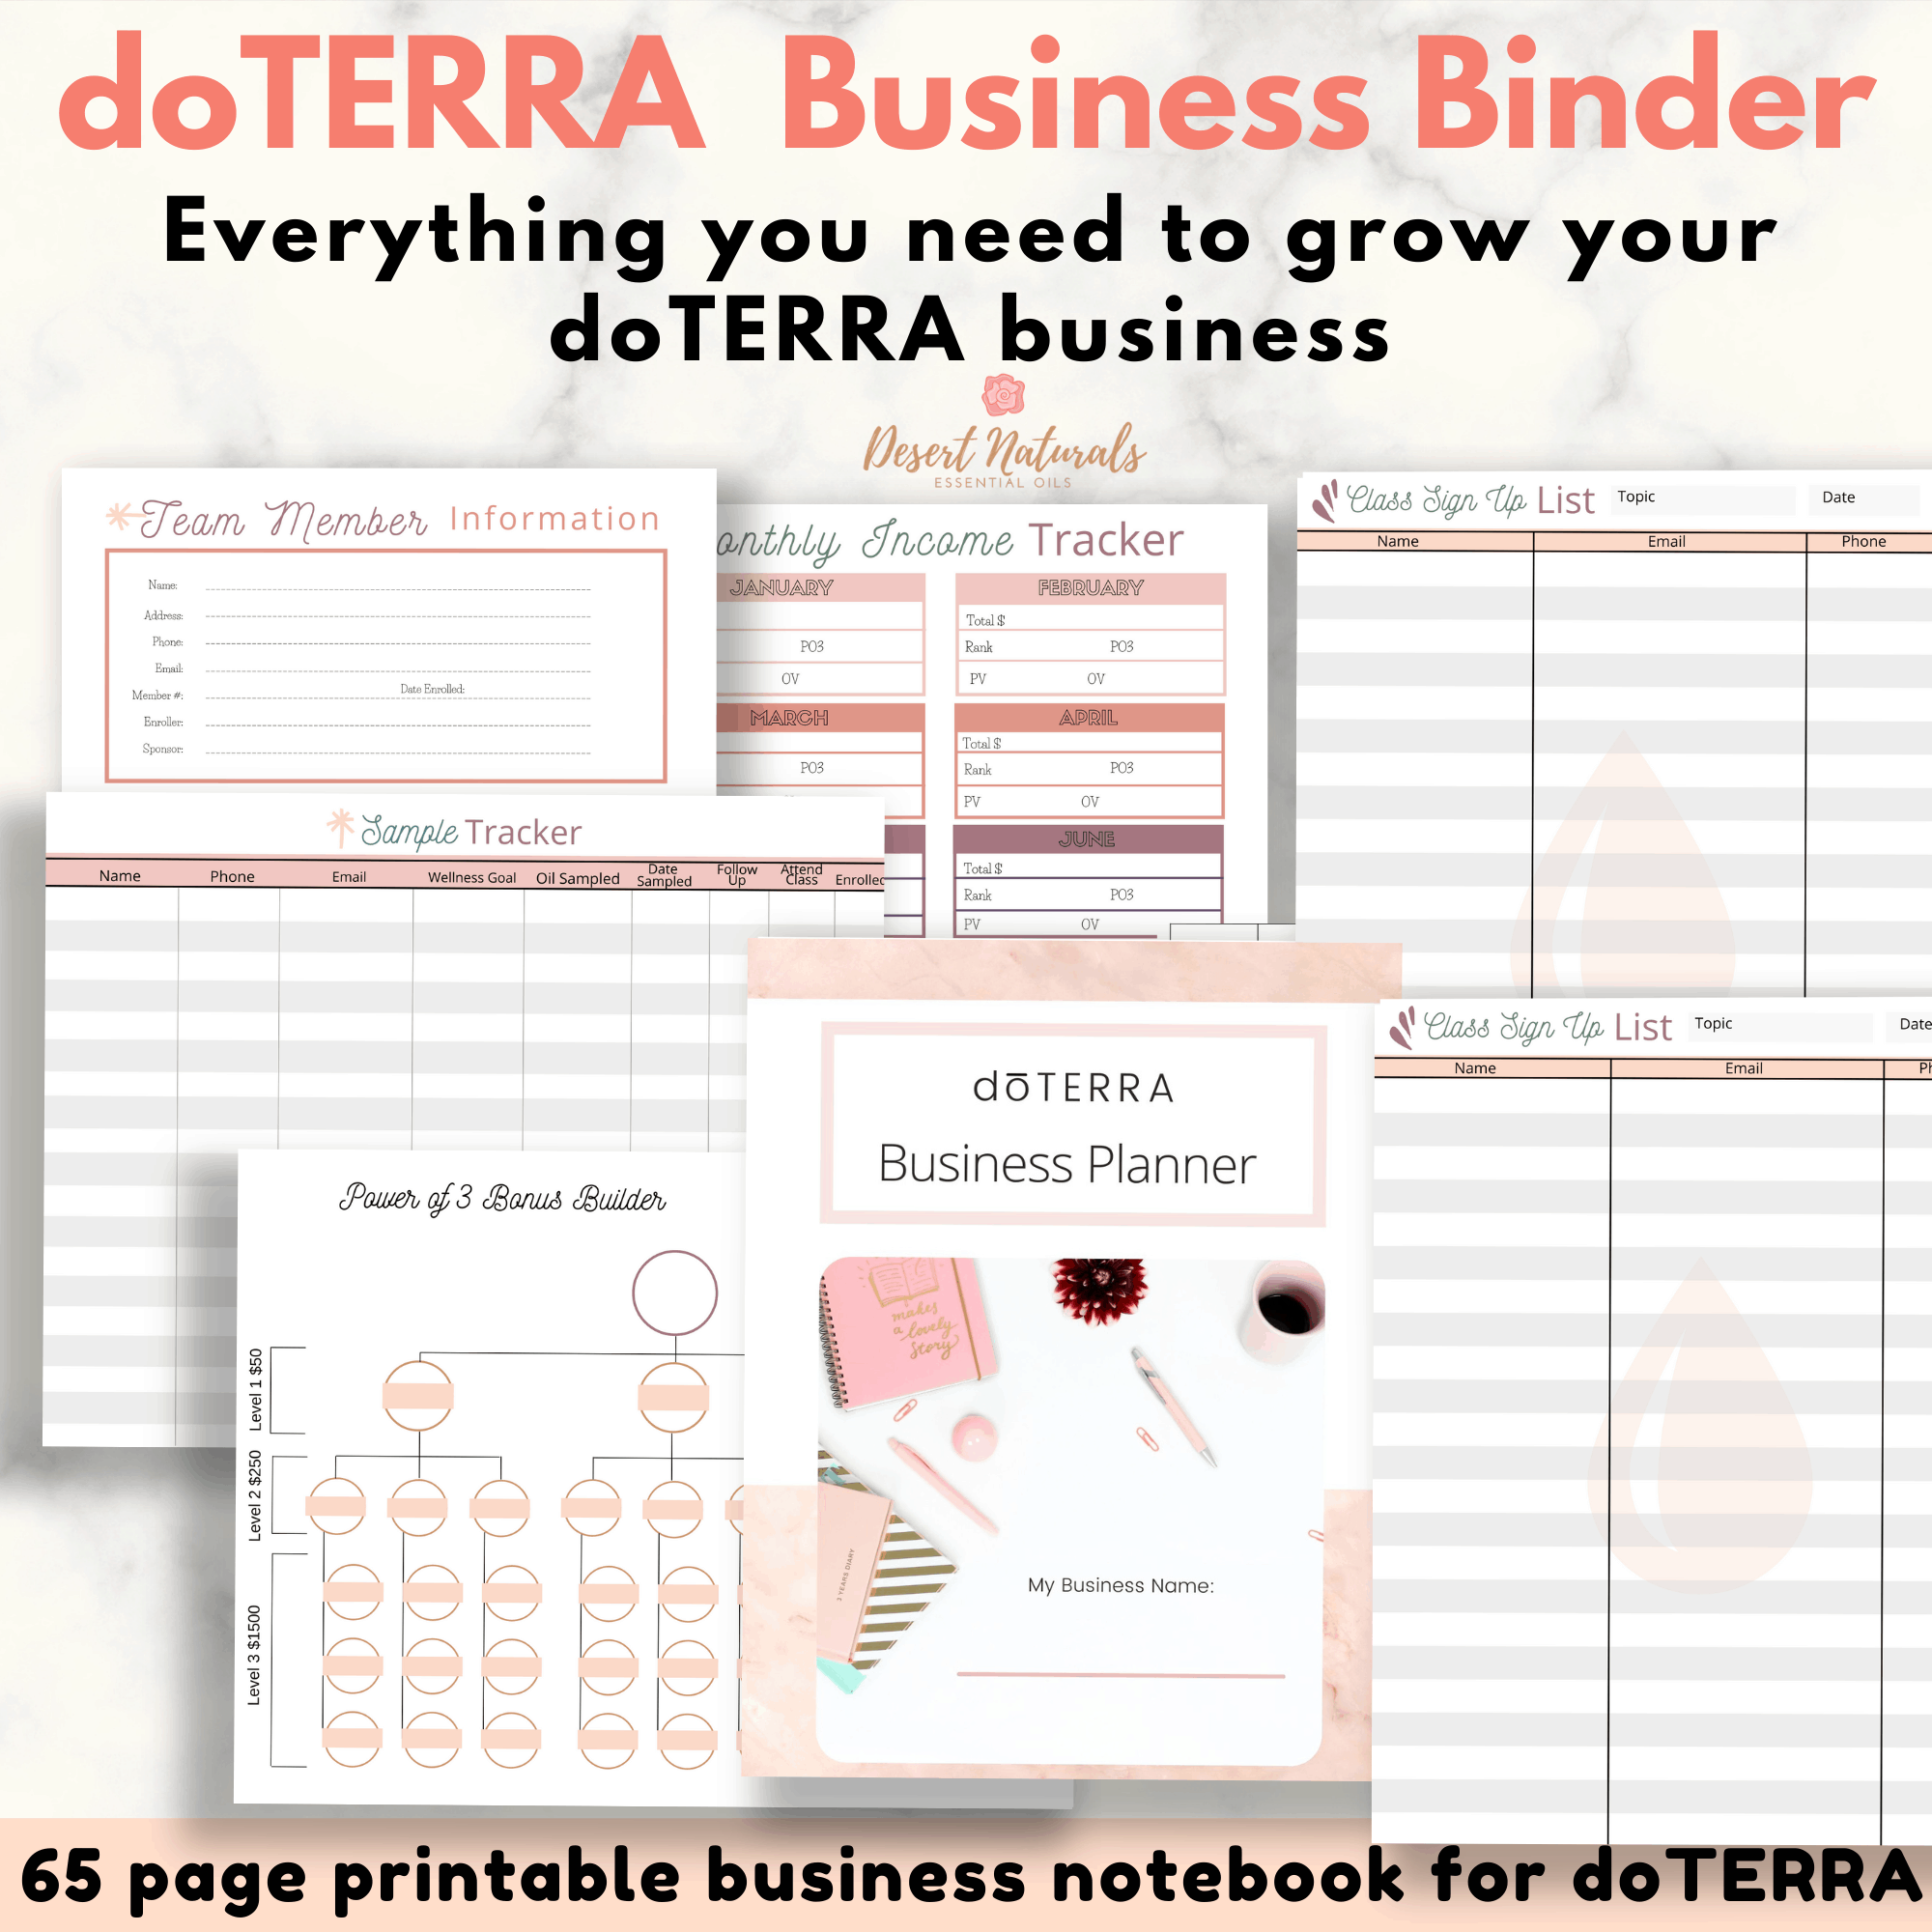 pages from the doTERRA Business binder printable